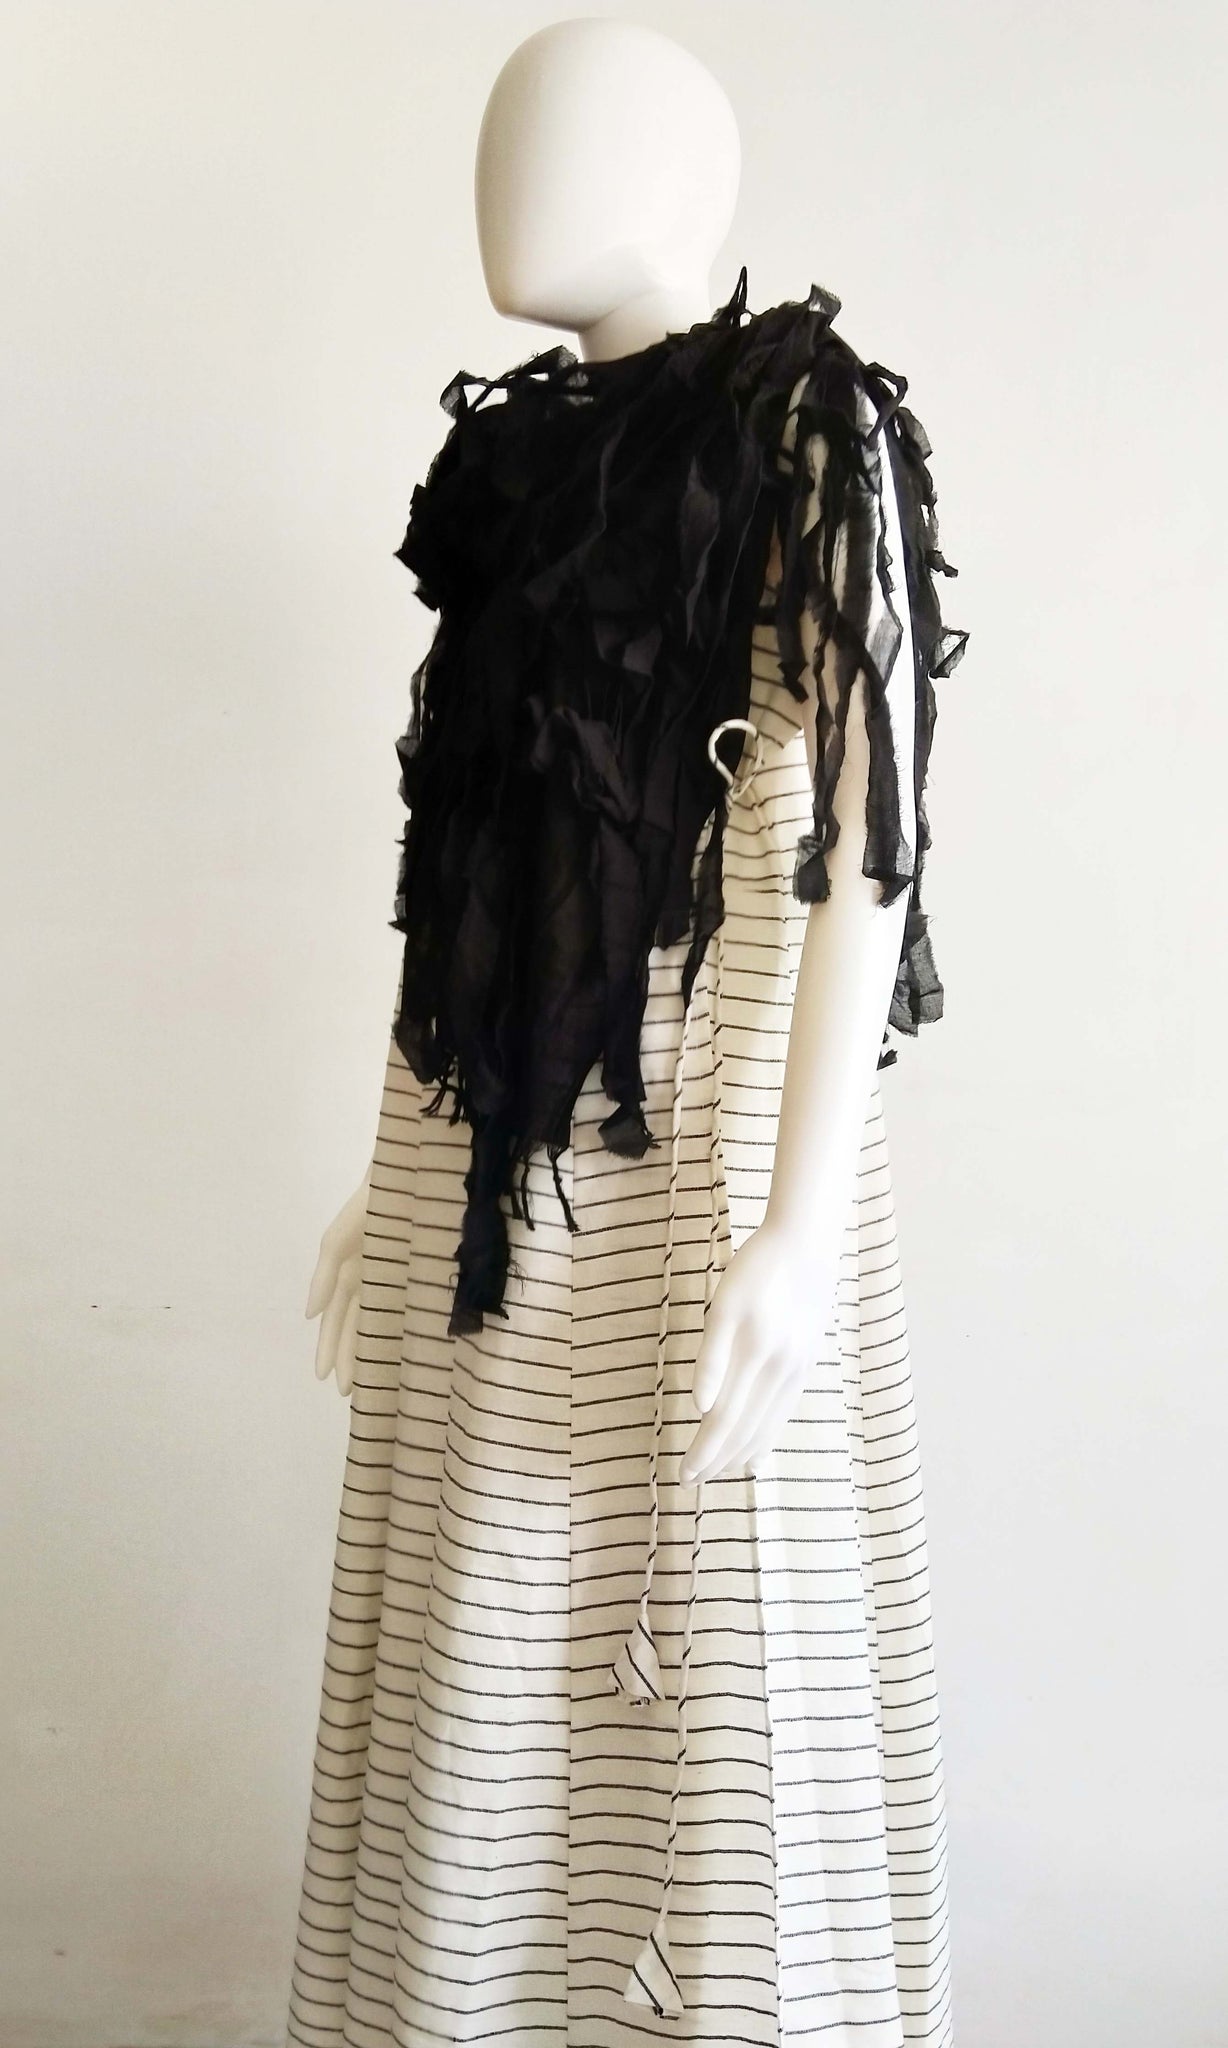 c35 Multipanel Tie Up Dress + Hand Textured Cotton Scarf | Hand Woven Cotton | Free Size ( Fits Sizes Small To Large ) | Ready To Ship